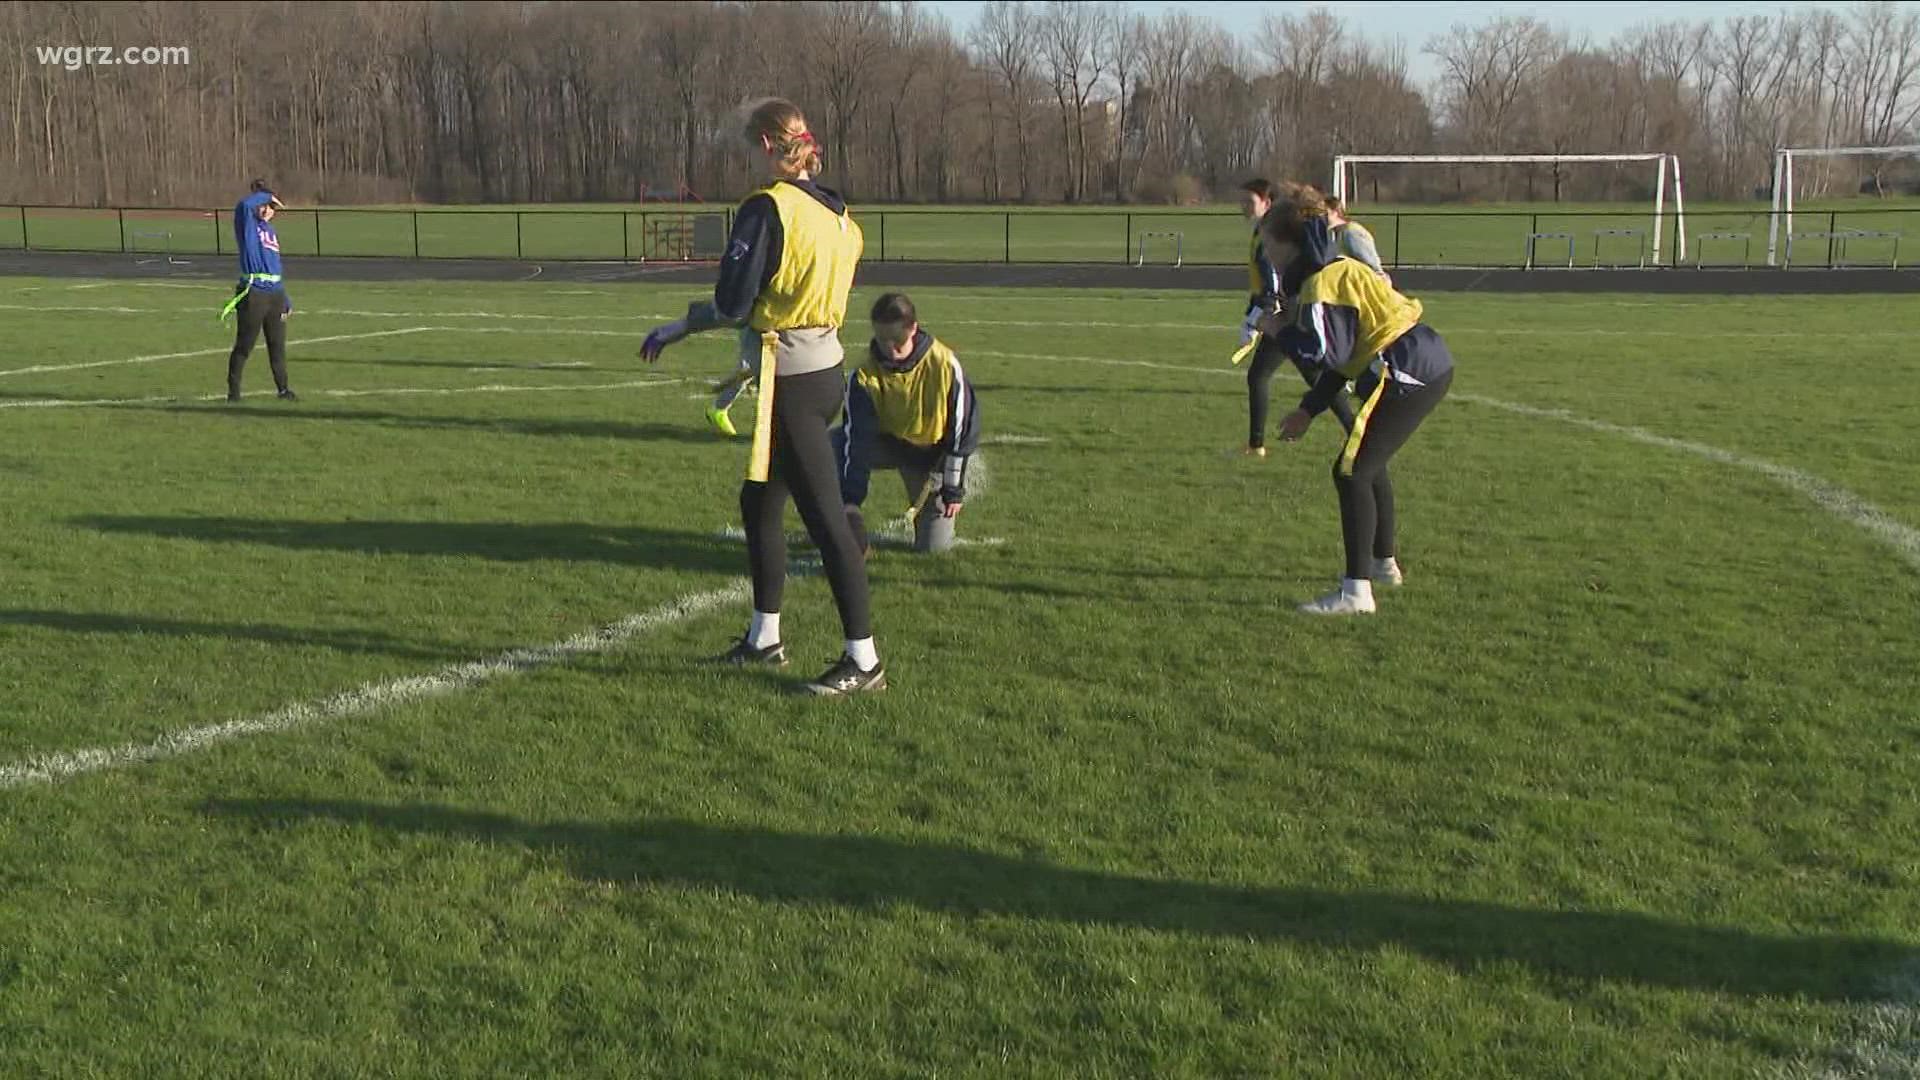 We are highlighting the girls who just want to play football. Girls flag football is now making its debut to local high schools in Western New York.